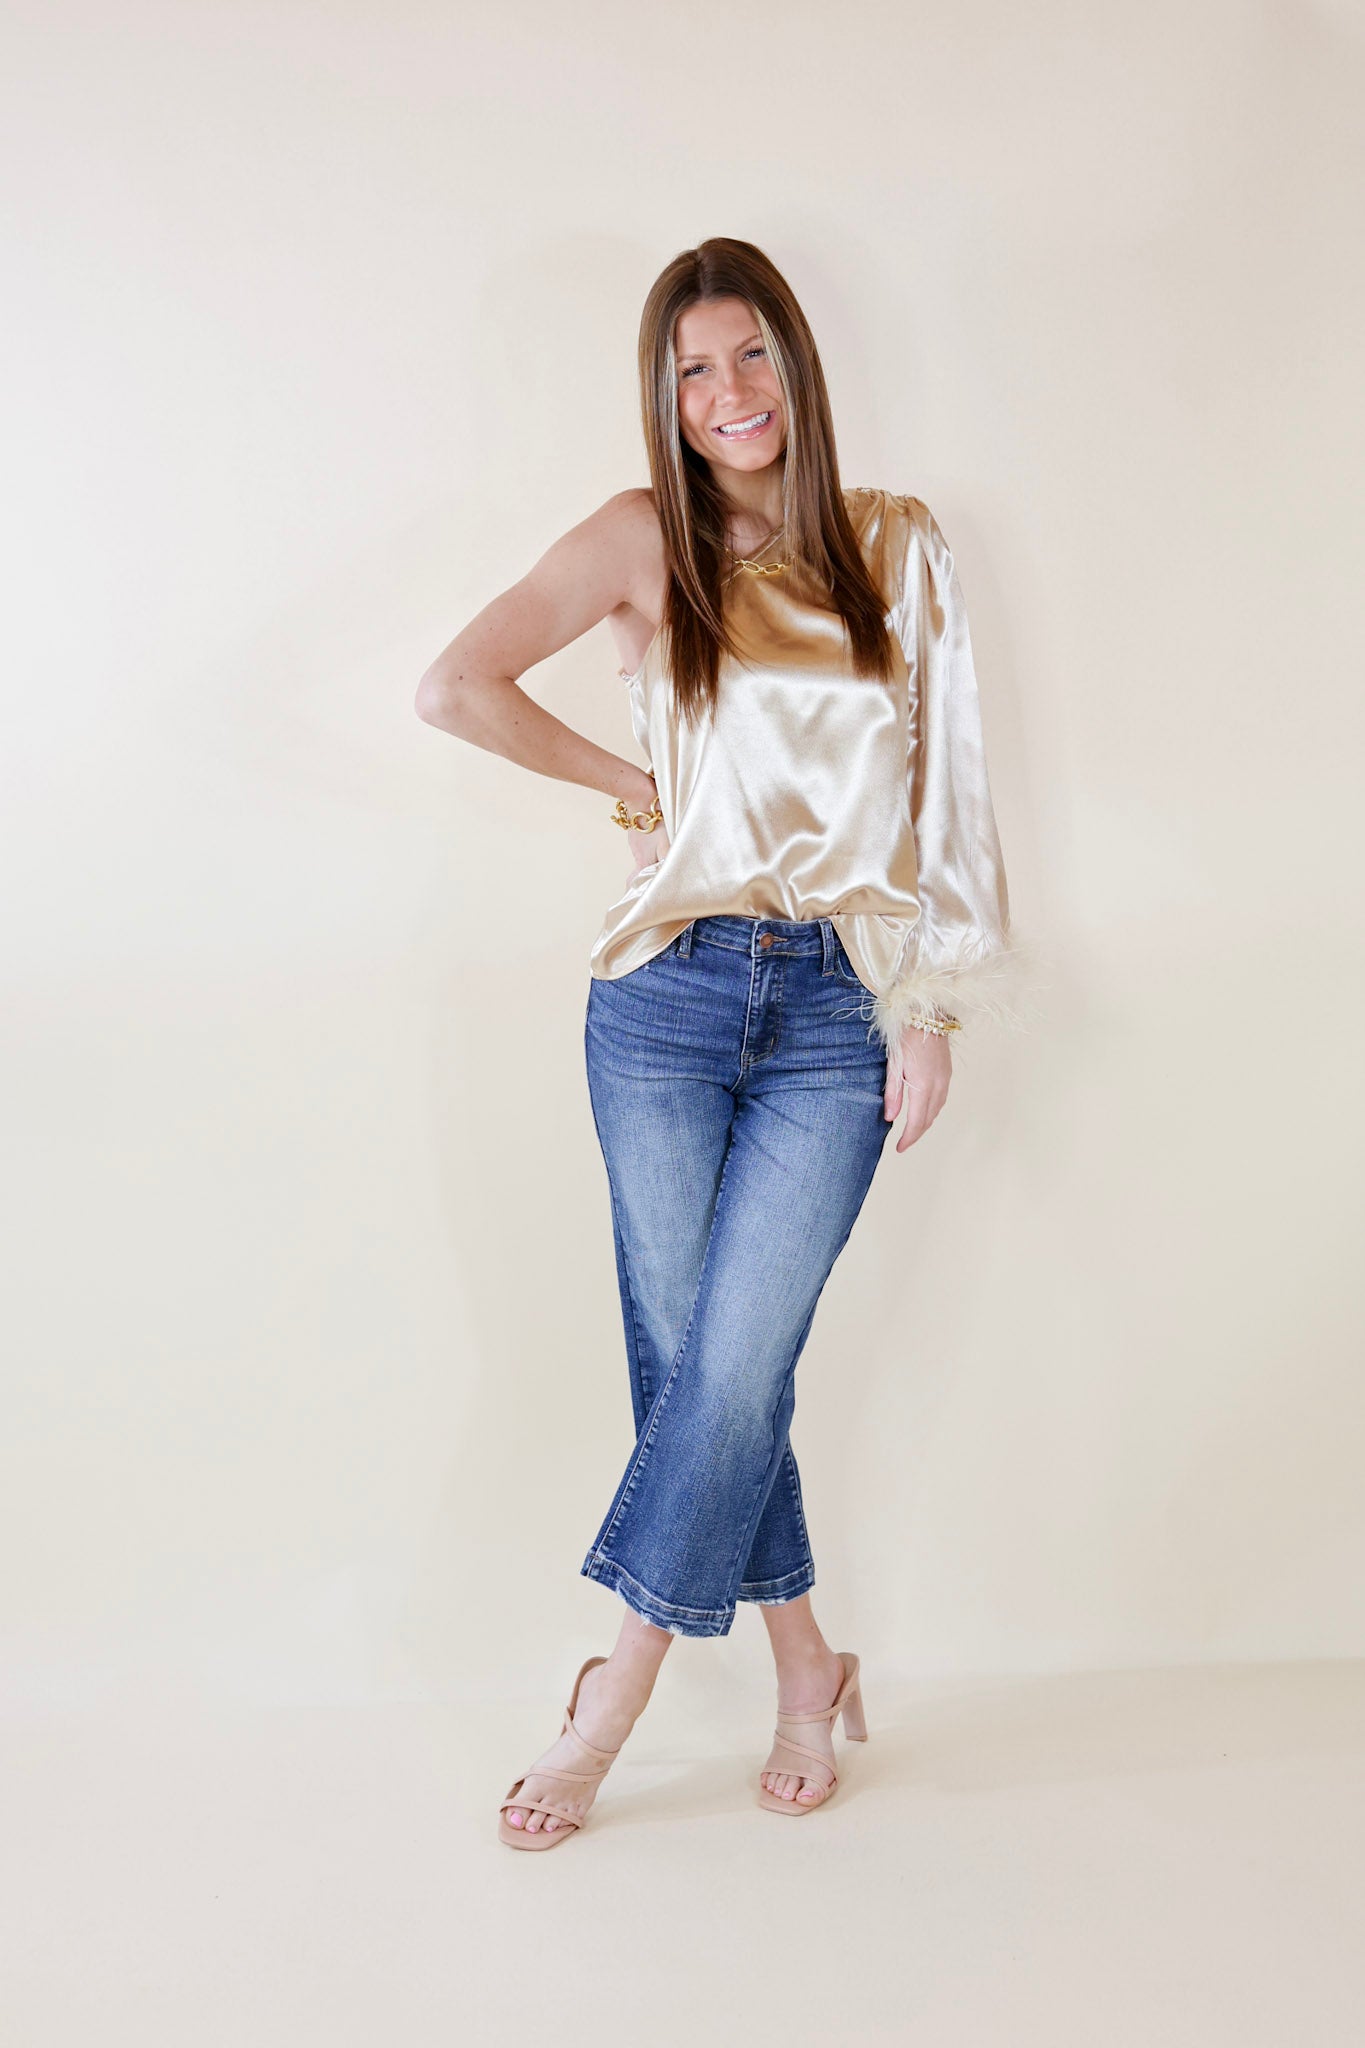 Full On Fashionista One Shoulder Satin Blouse with Feather Trim in Champagne - Giddy Up Glamour Boutique